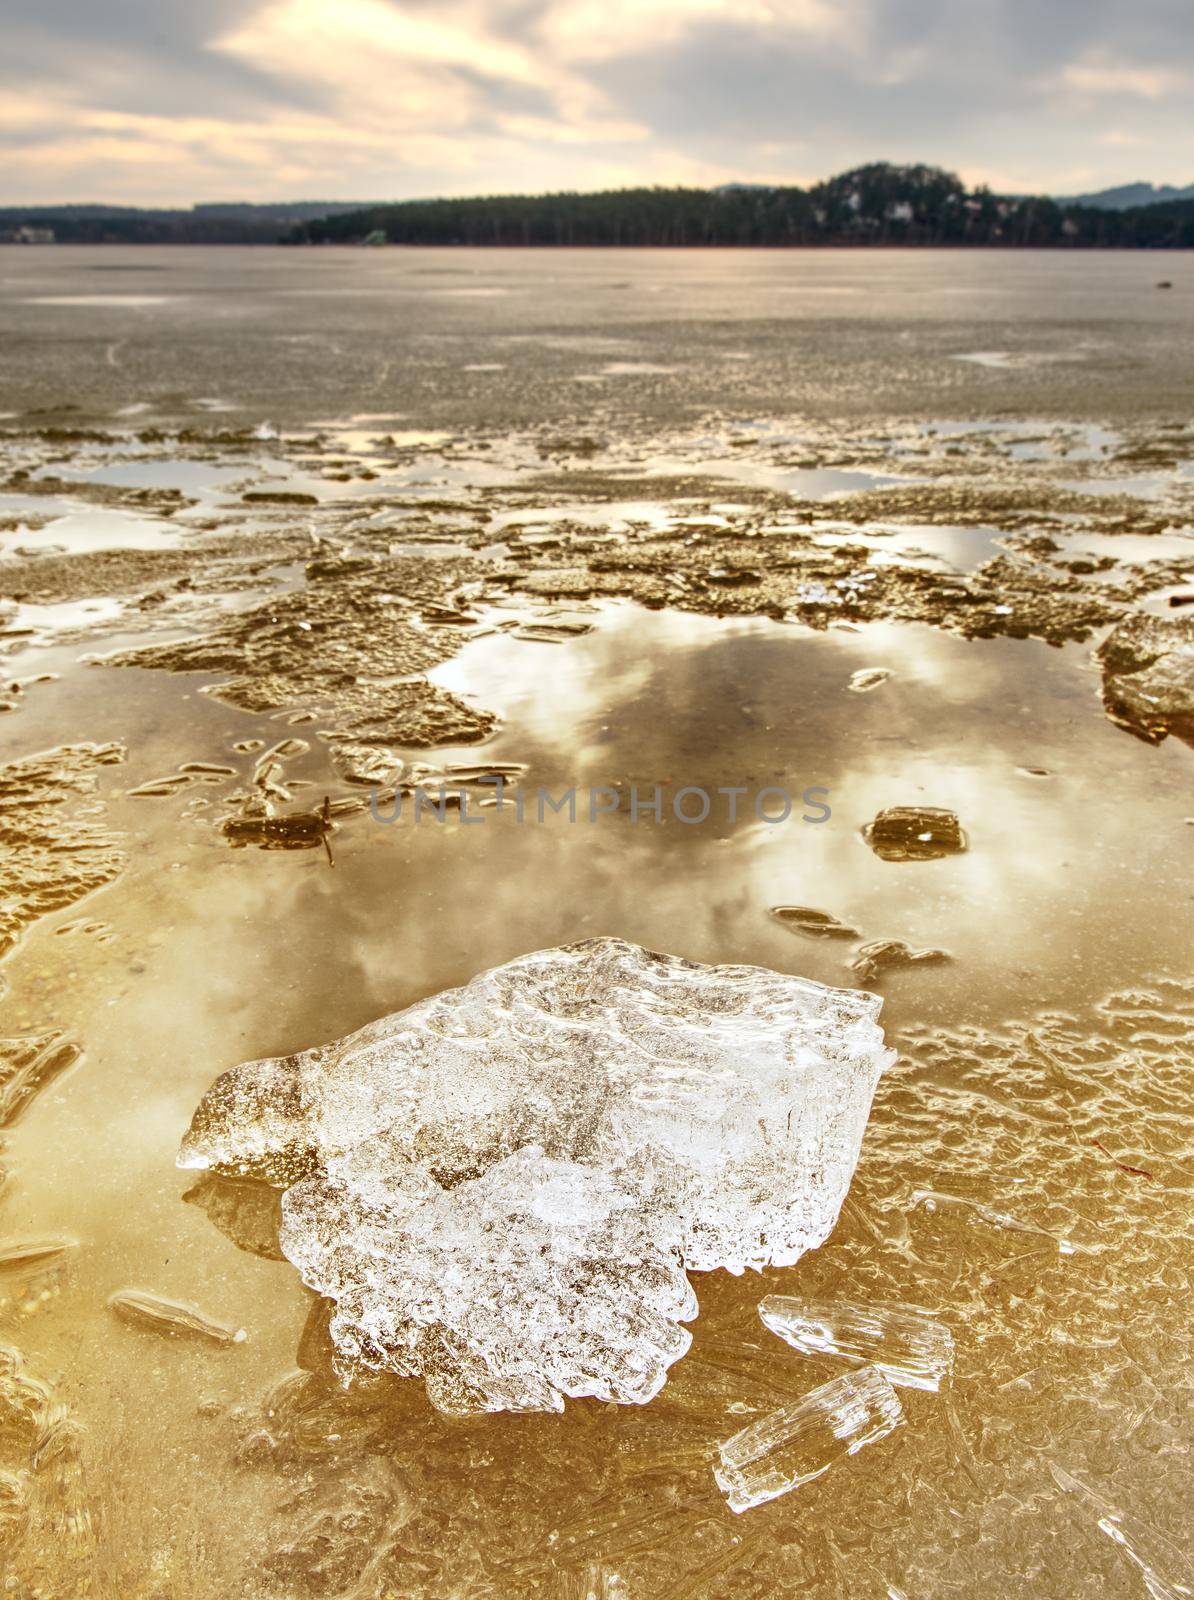 Winter natural wonder. Yellow pieces of snow melting on beach. Wonderful nature creation.